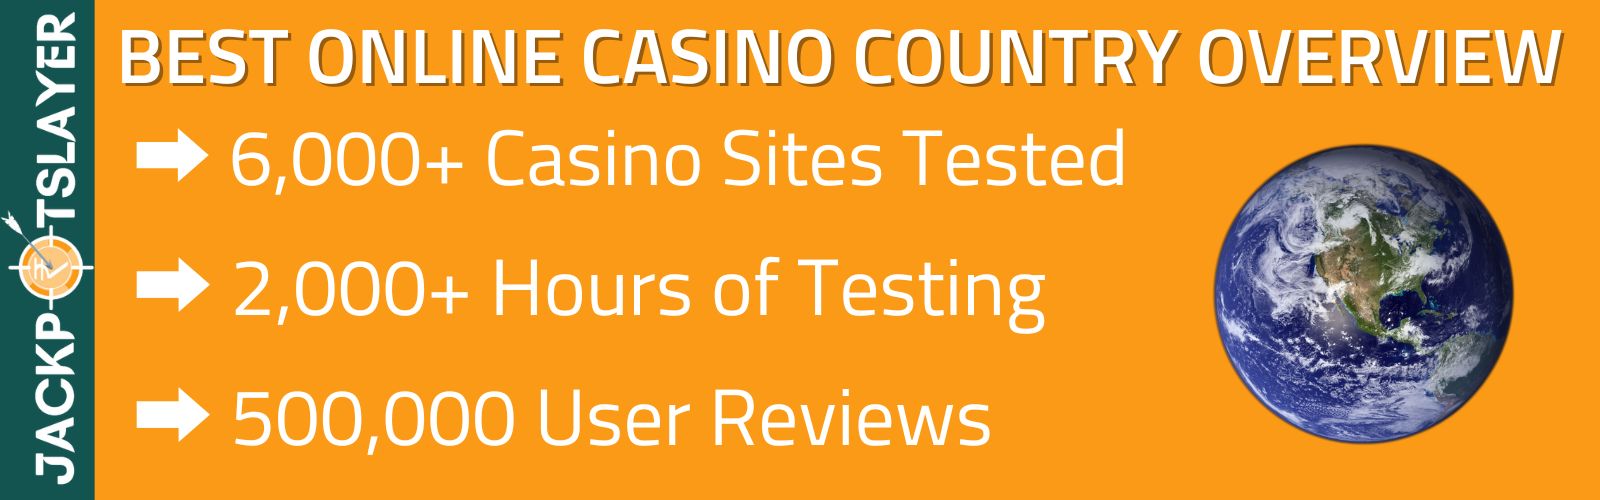 Online Casino Country Overview